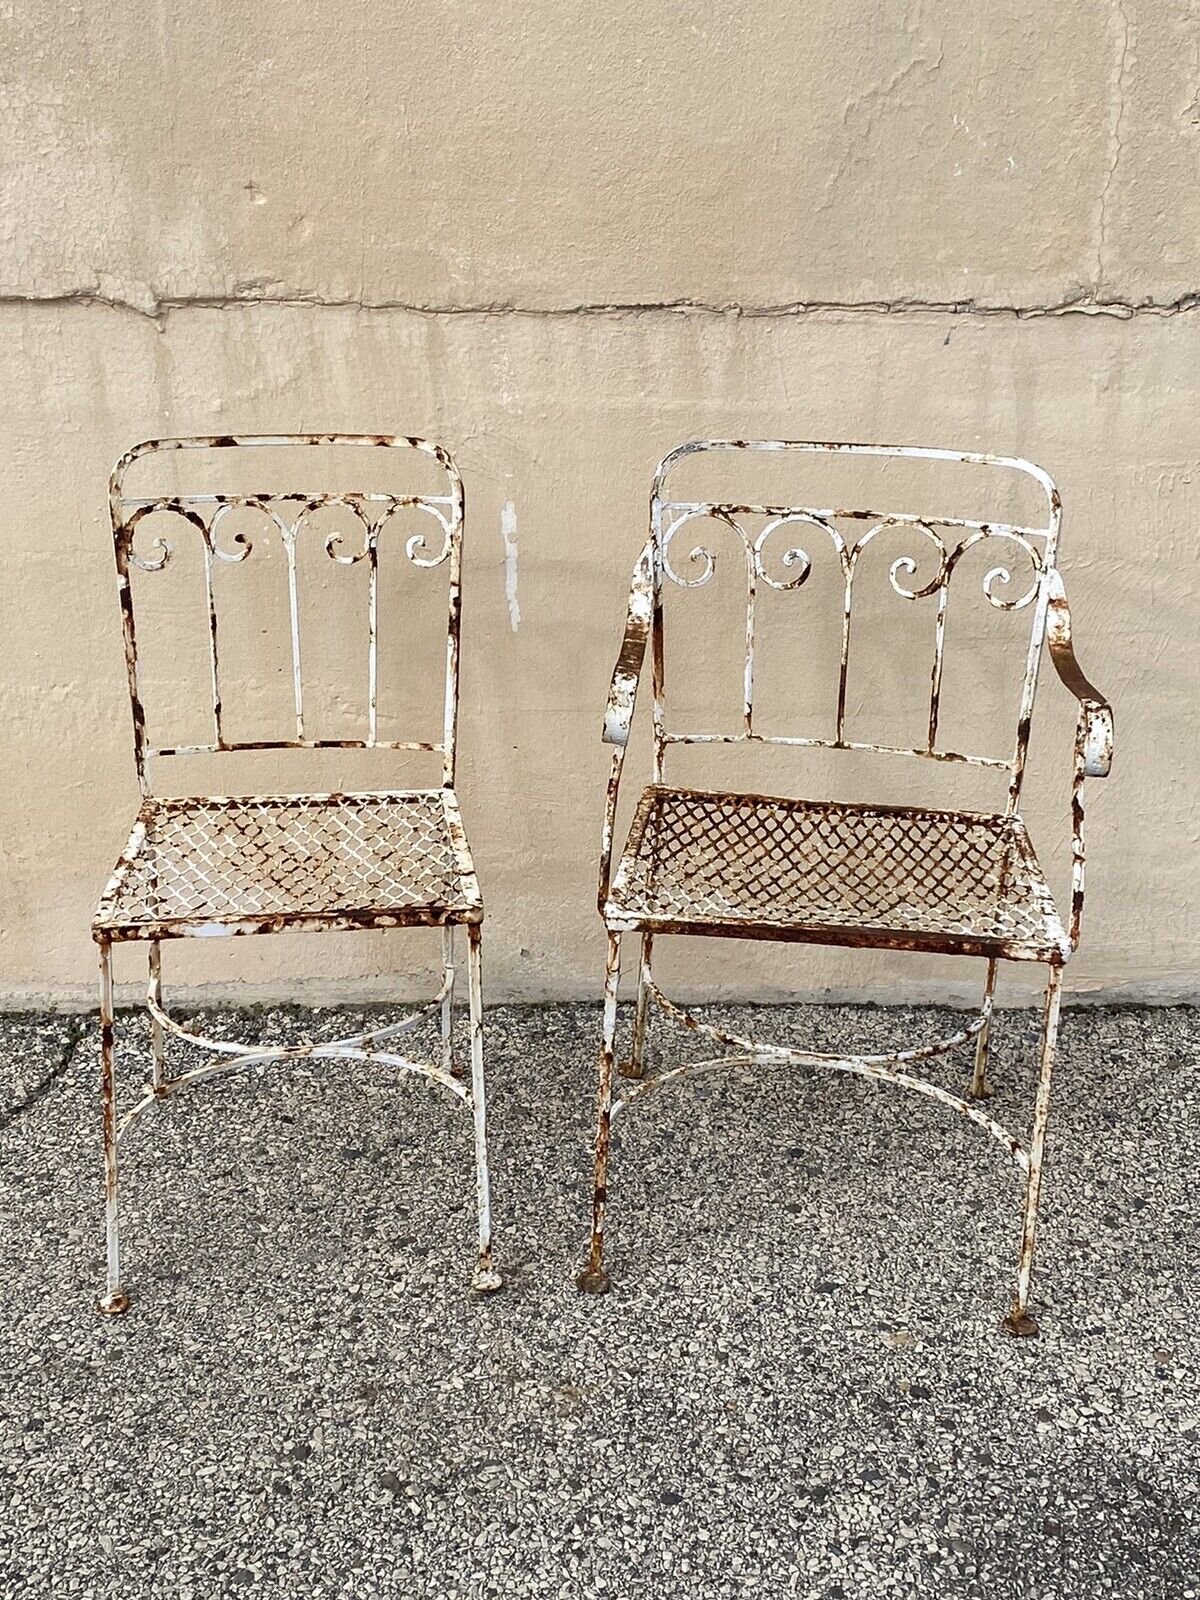 Antique Art Nouveau Scrolling Wrought Iron Garden Patio Dining Chairs - A Pair